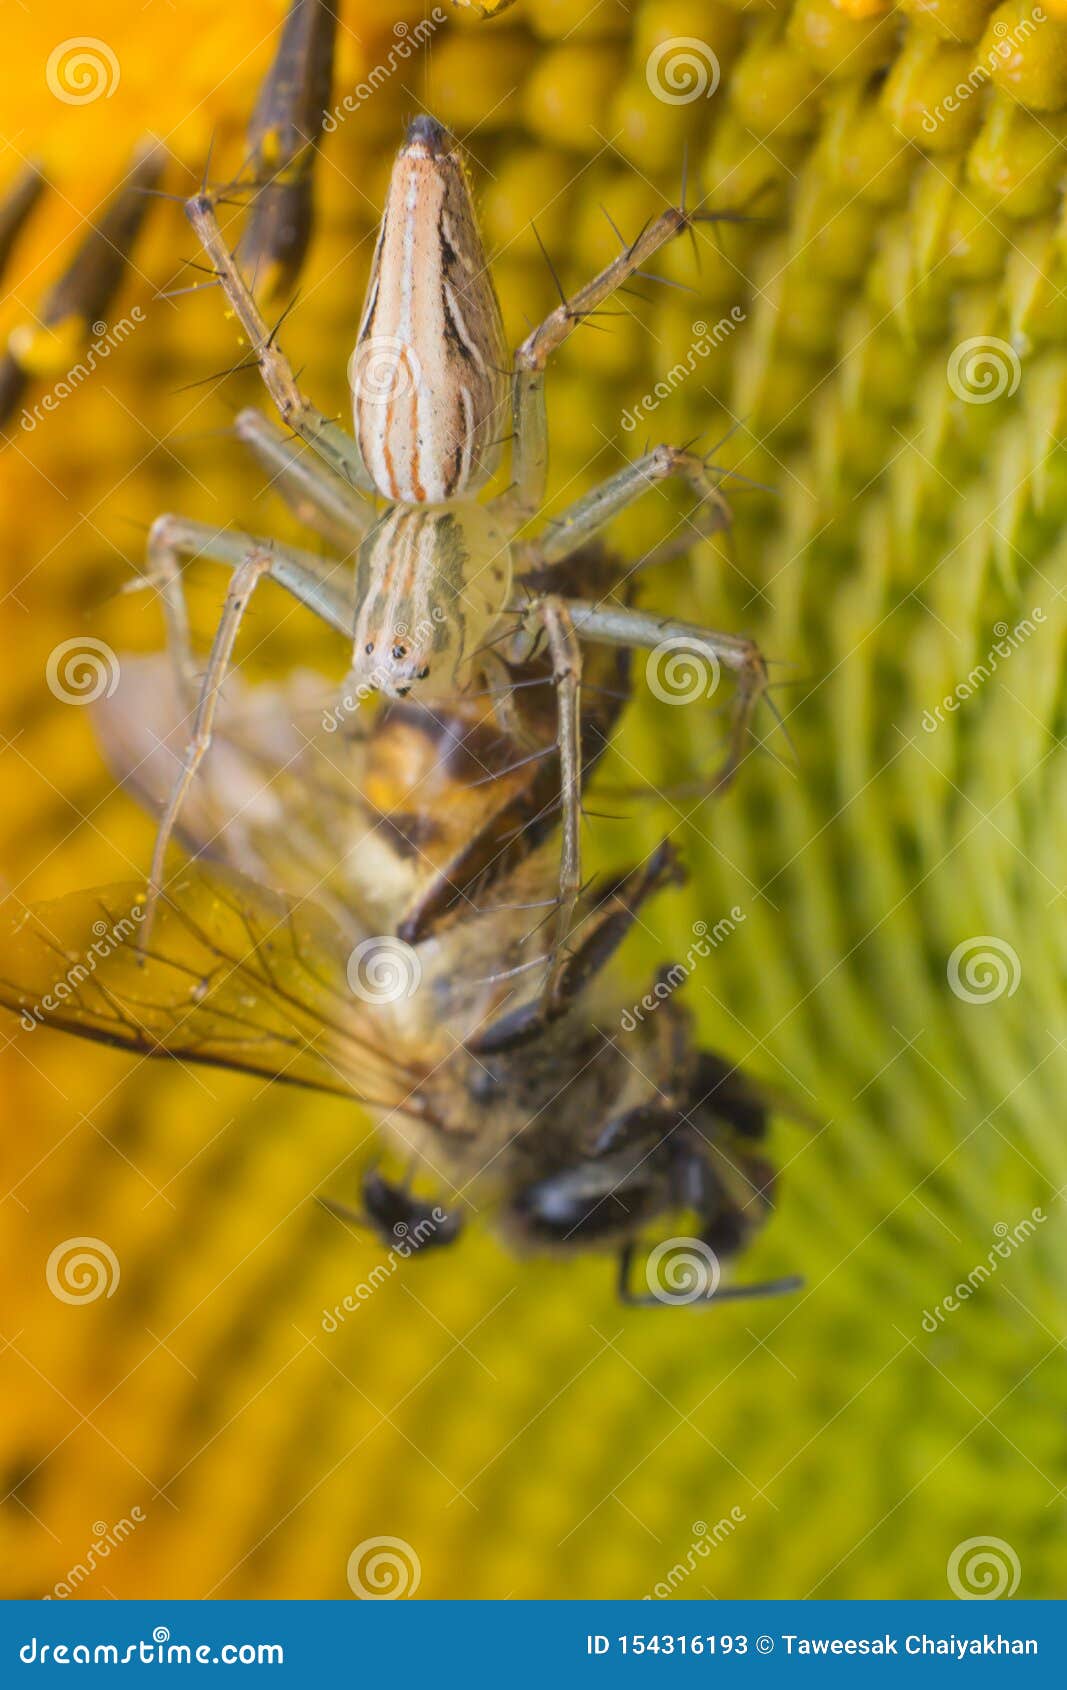 Macro Of Spider Hunter Insect In Nature Stock Image ...